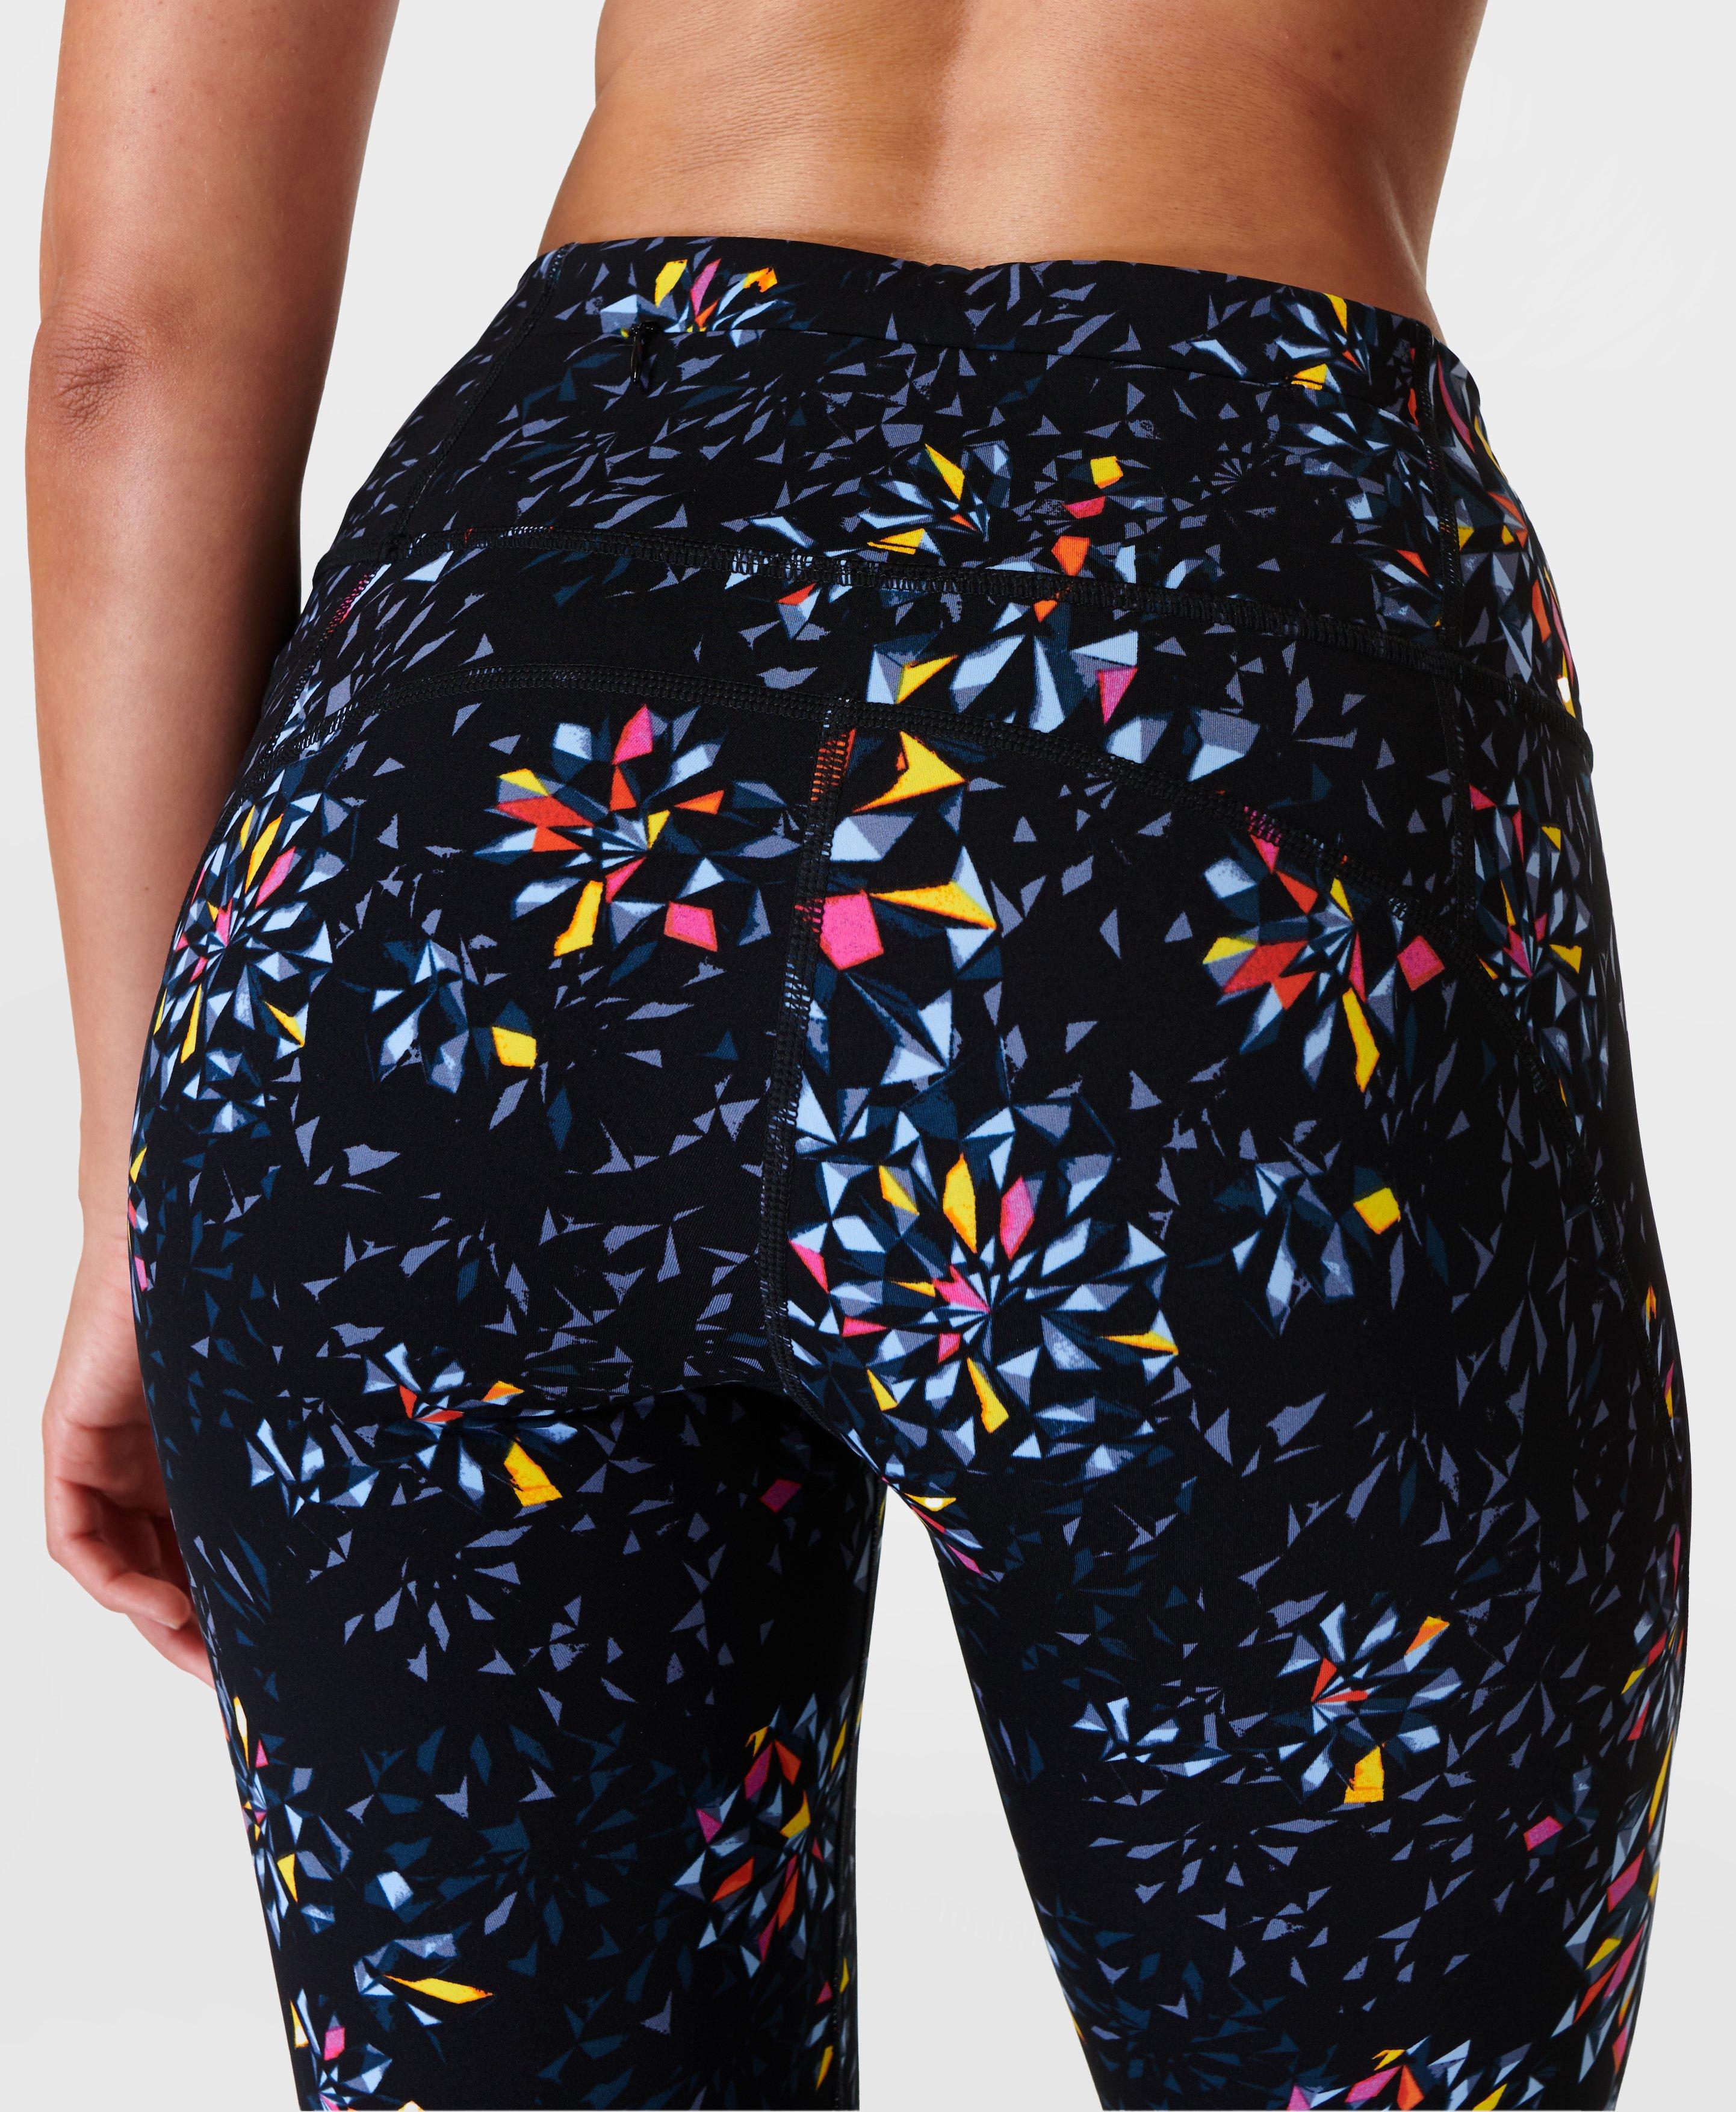 Power Cropped Workout Leggings - Black Faceted Floral Print